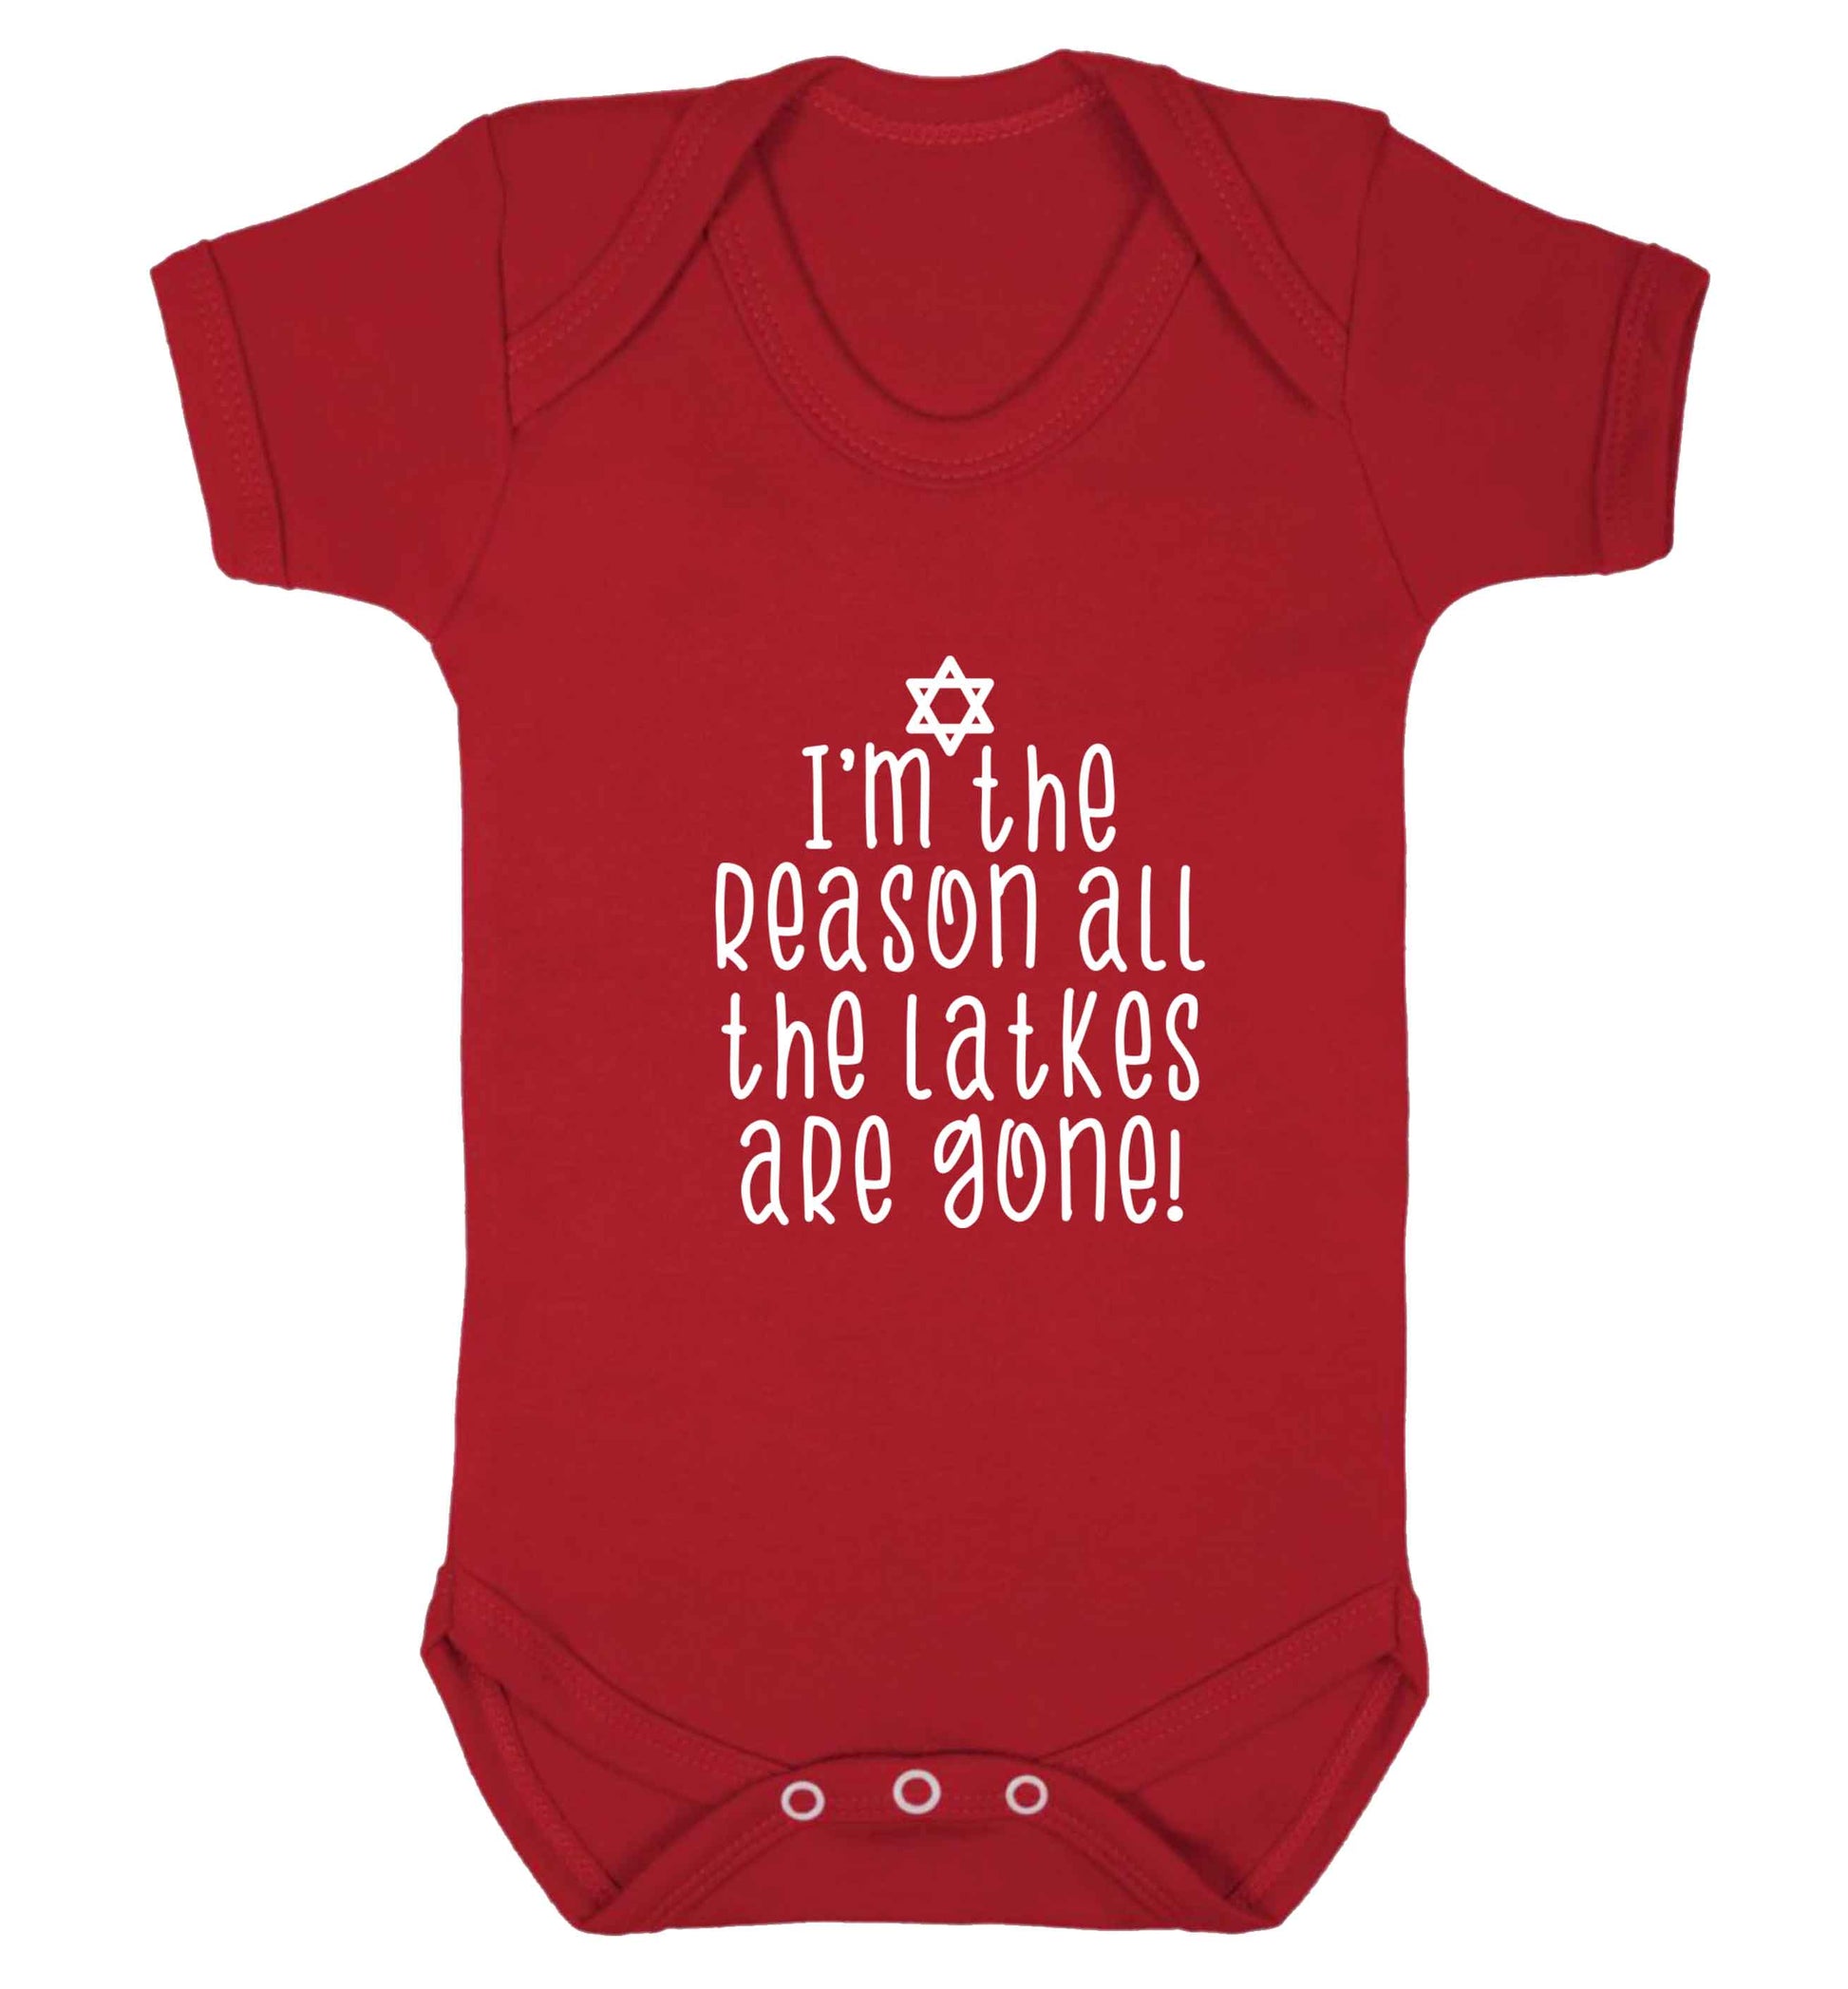 I'm the reason all the latkes are gone baby vest red 18-24 months